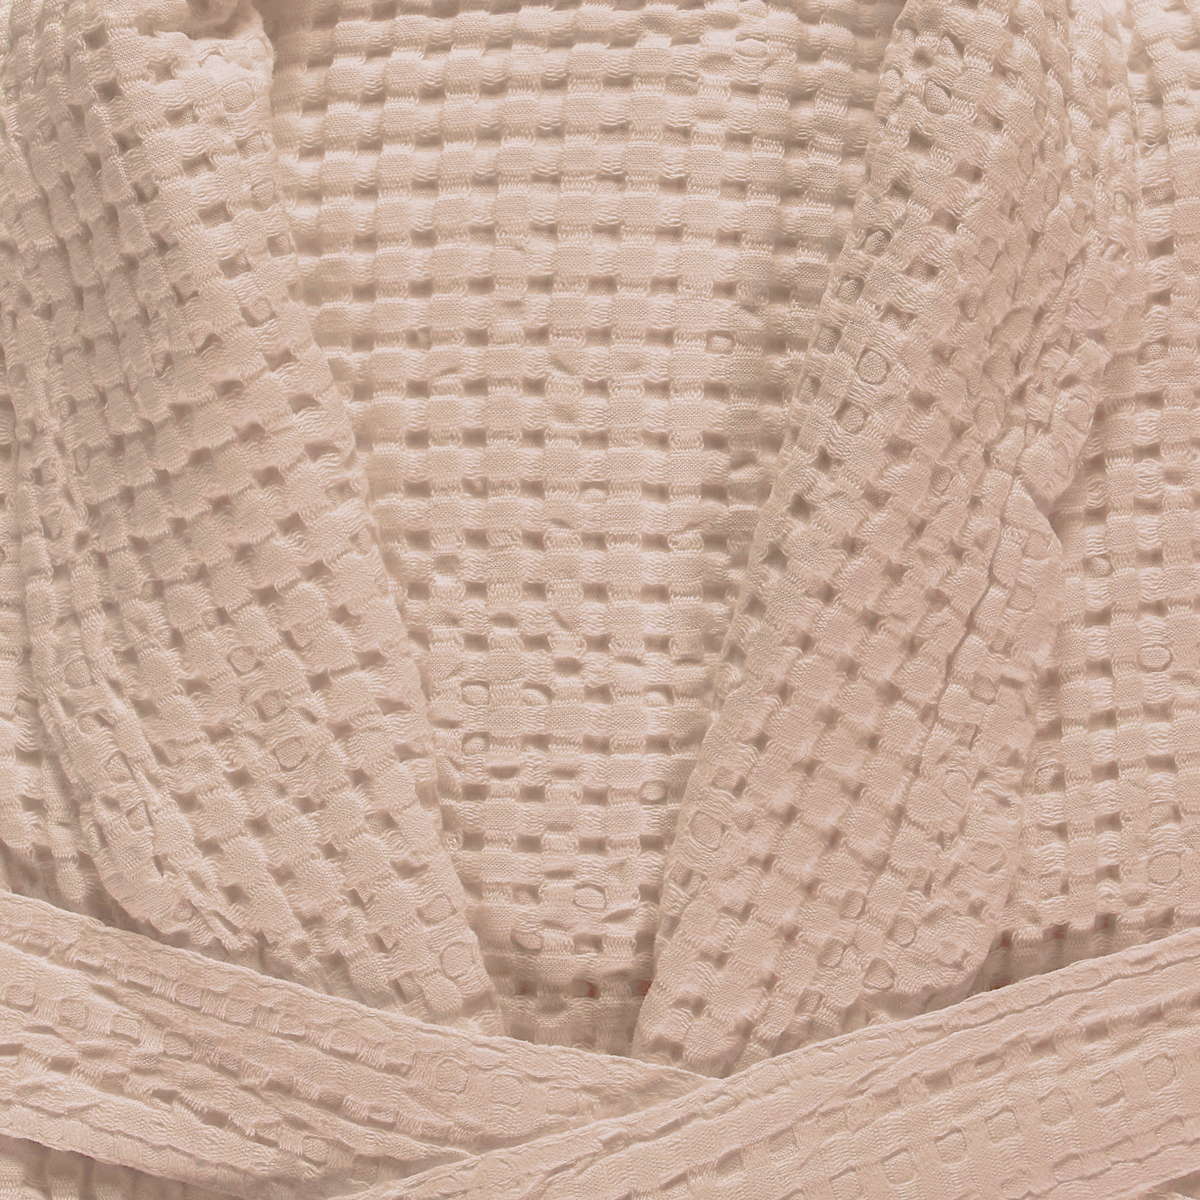 Fabric Closeup of Abyss Pousada Bath Robe in Nude Color